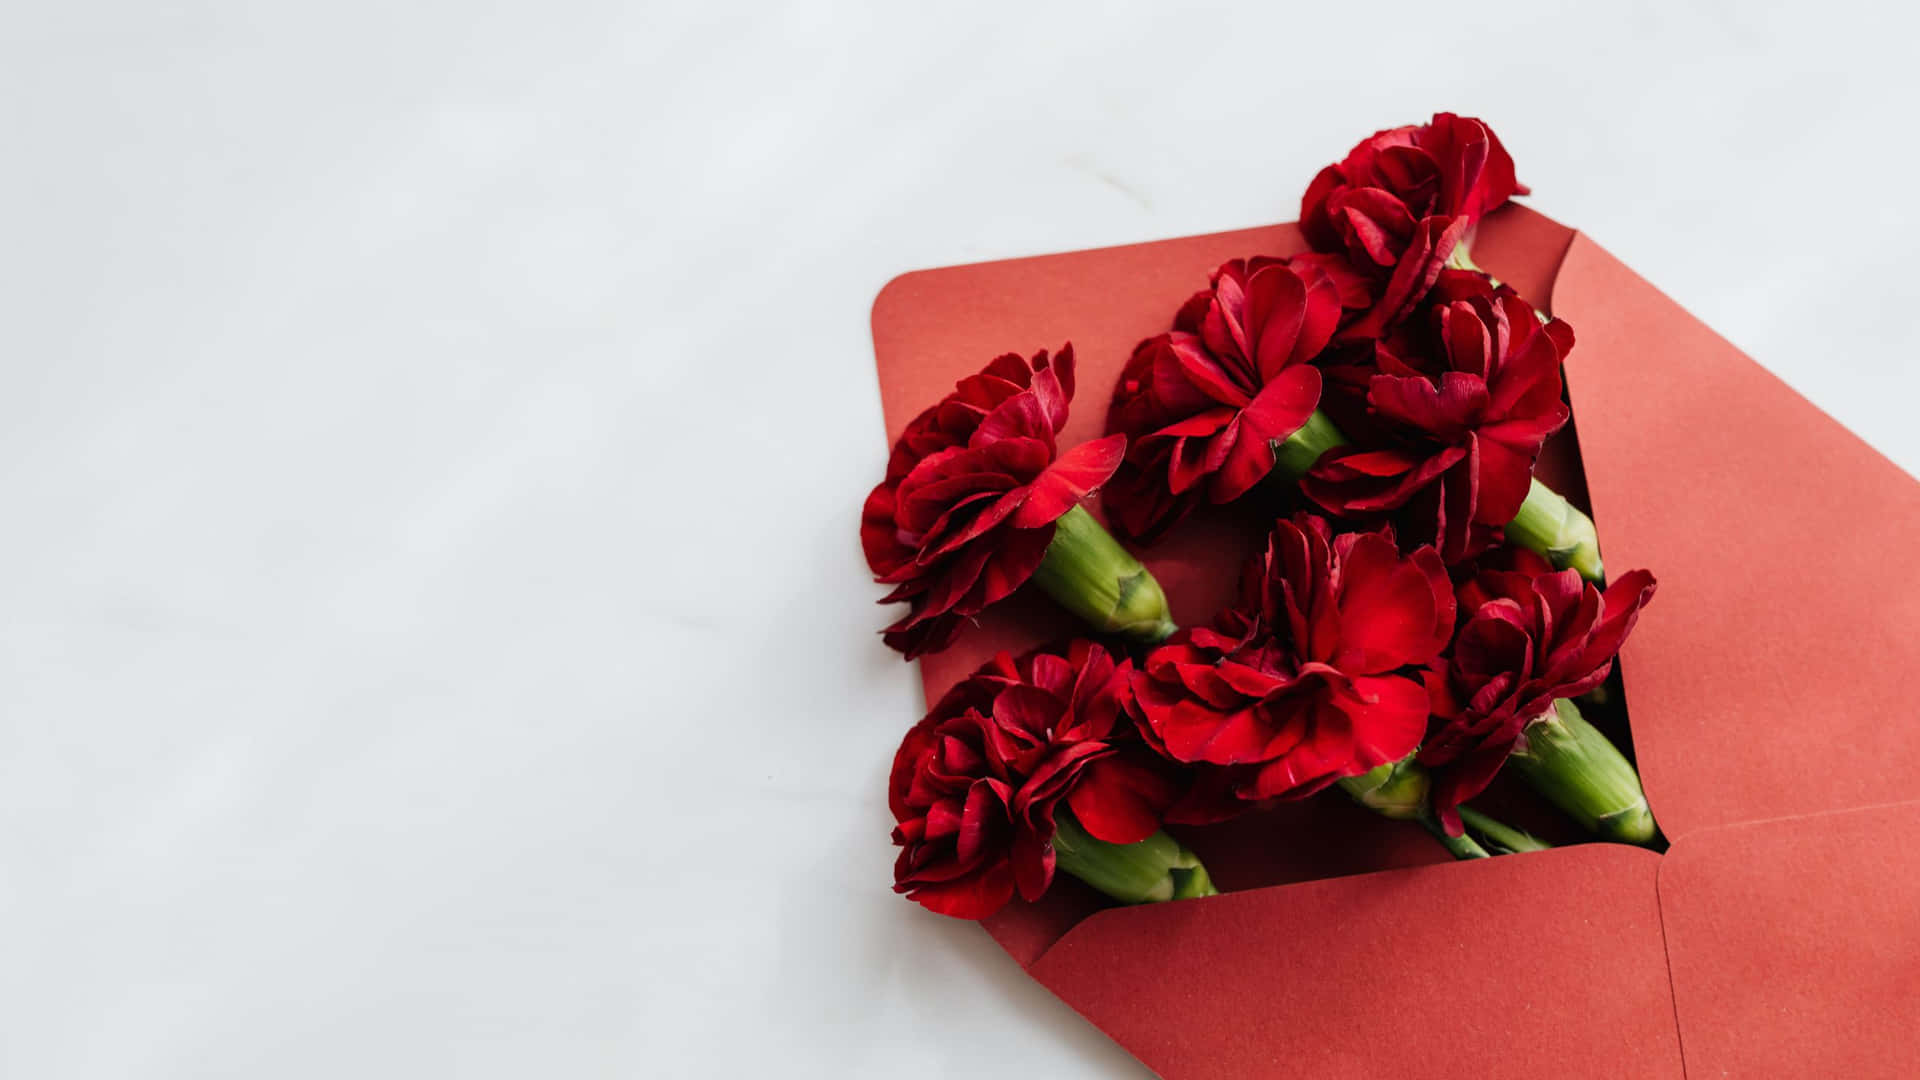 Red Carnations In An Envelope On A White Surface Wallpaper